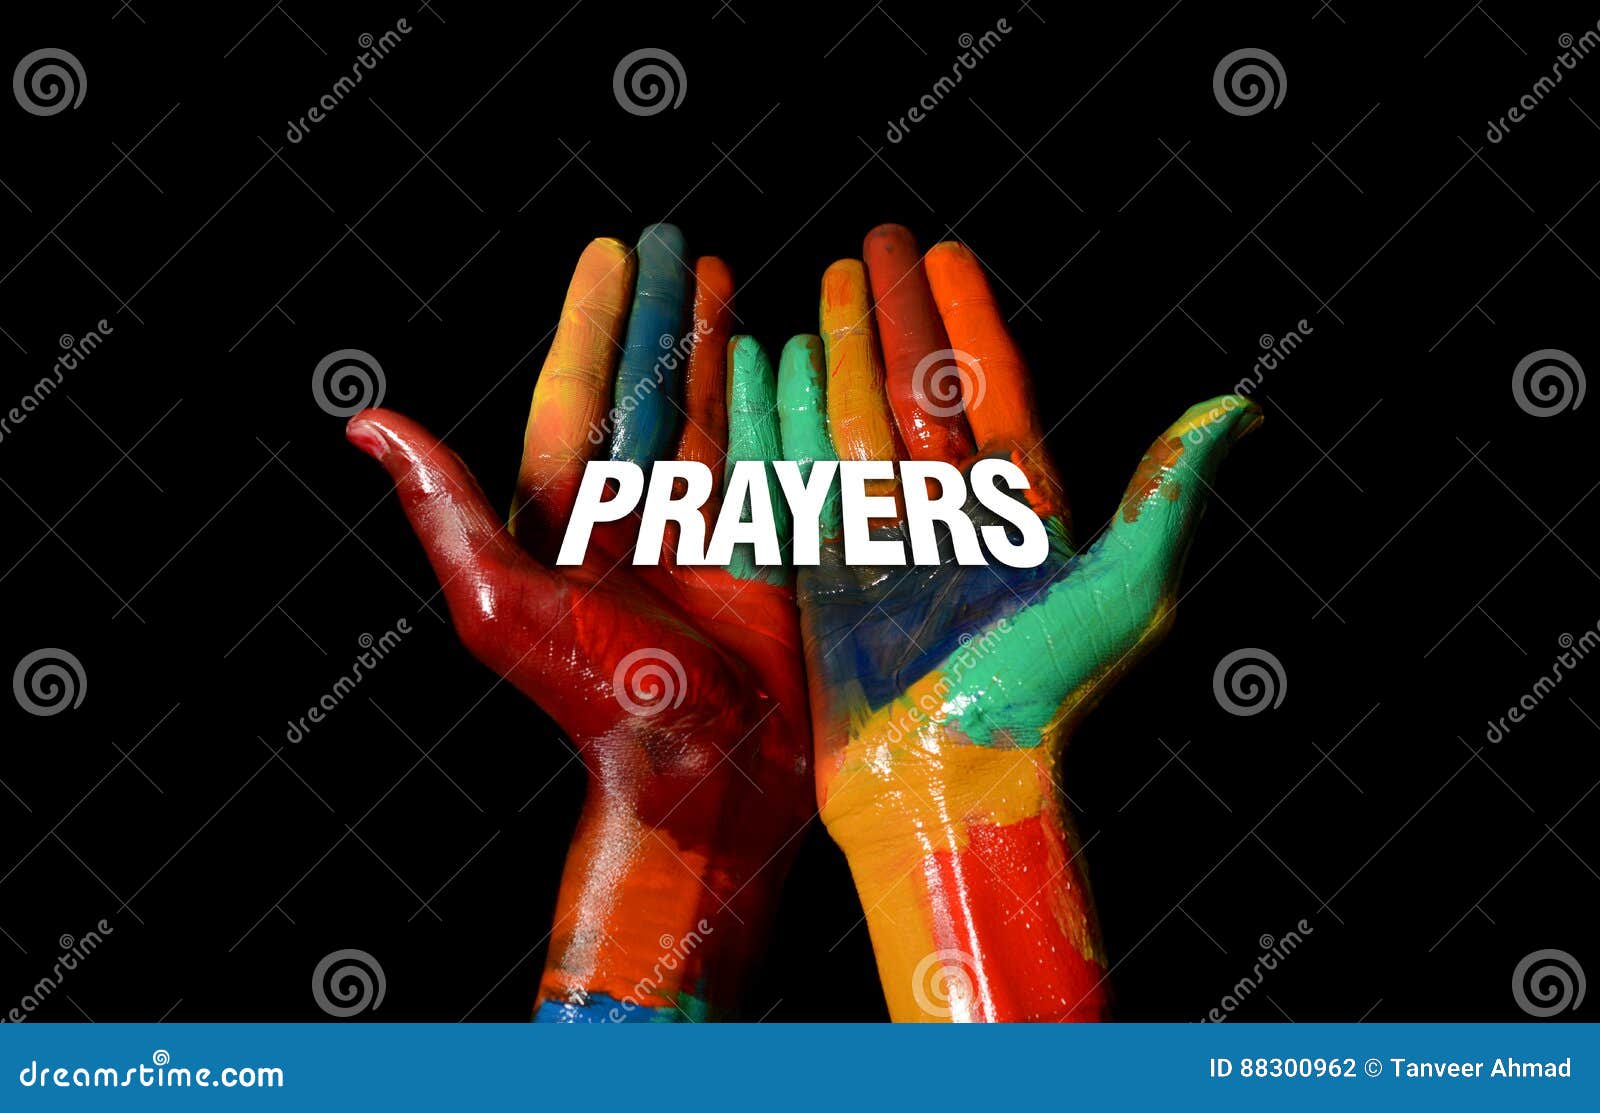 prayers word concept on multi colors painted hand